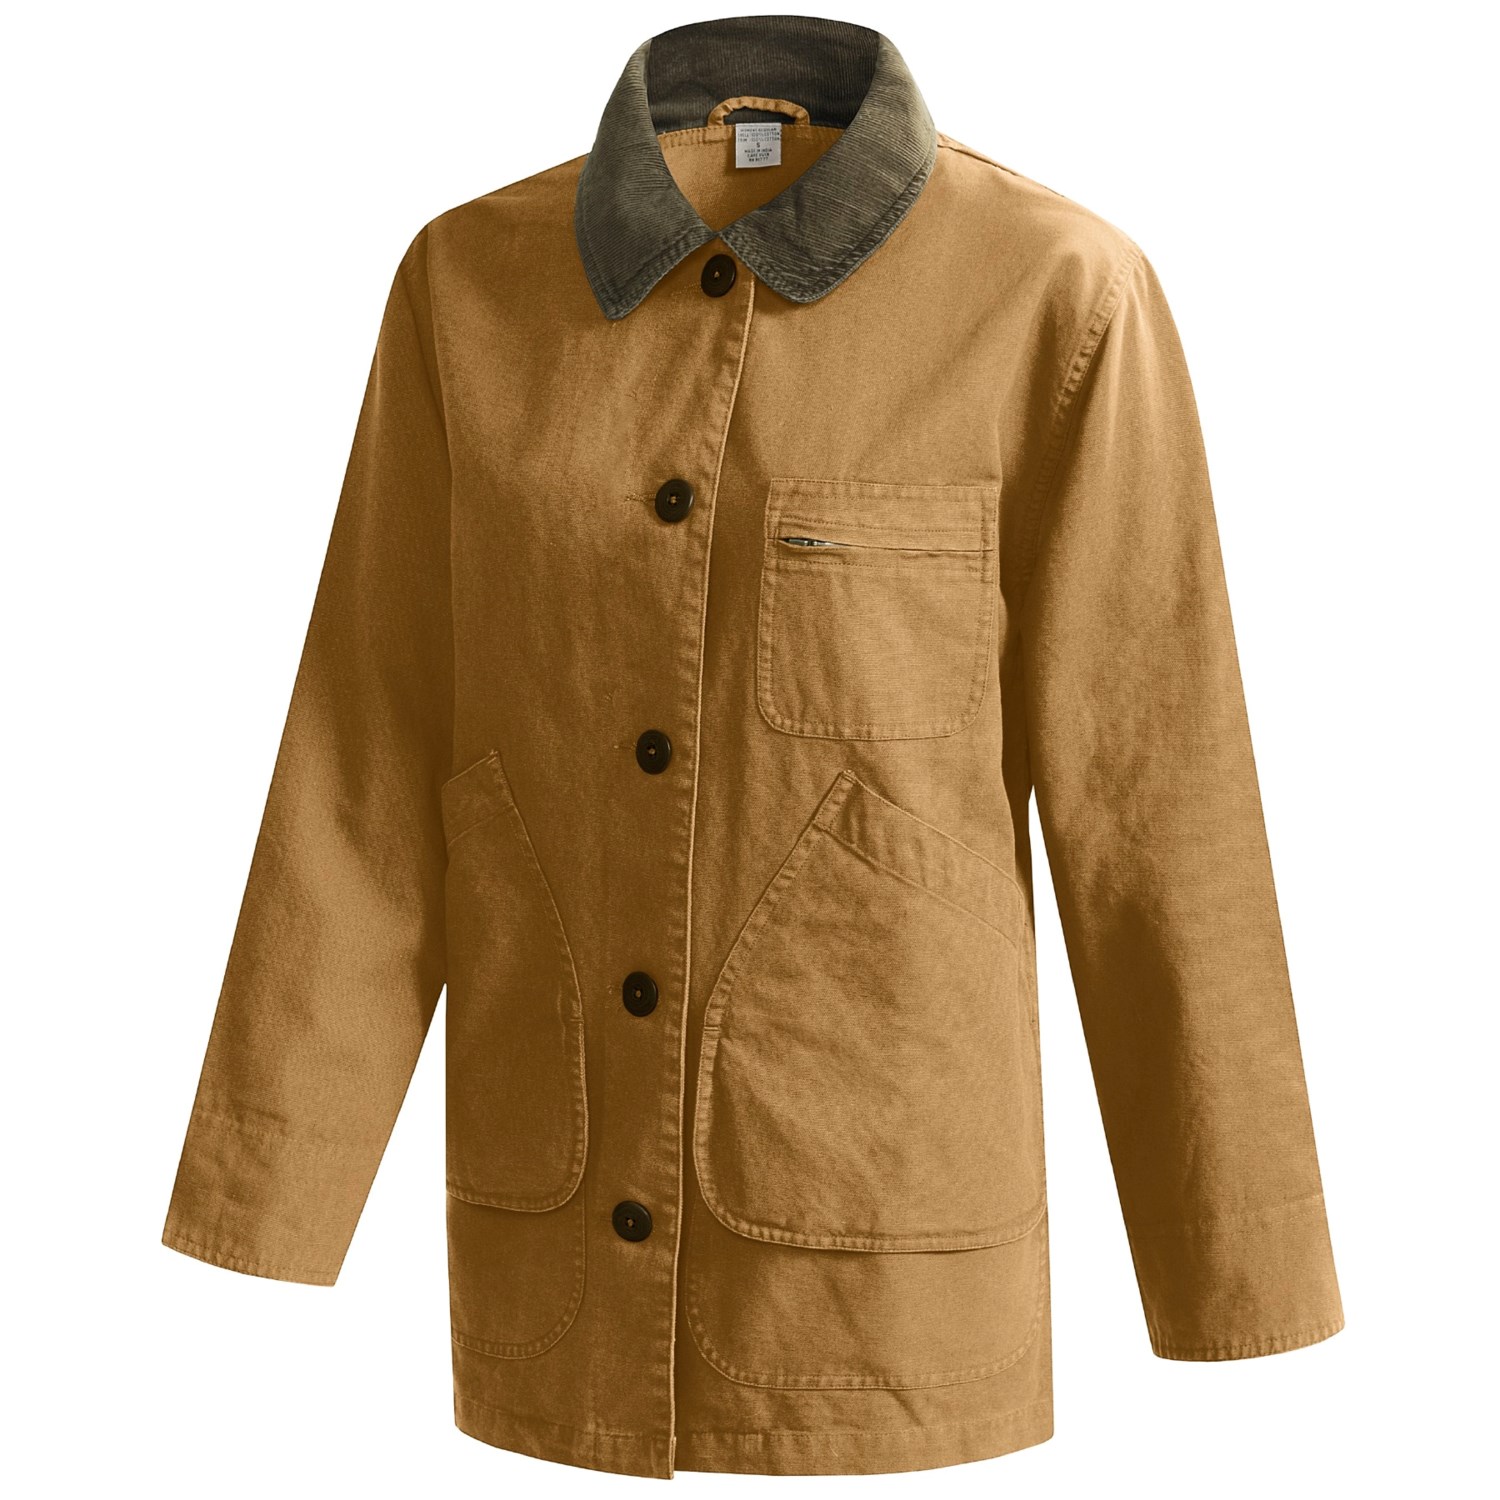 Cotton Canvas Barn Coat (For Women) 41855 - Save 74%